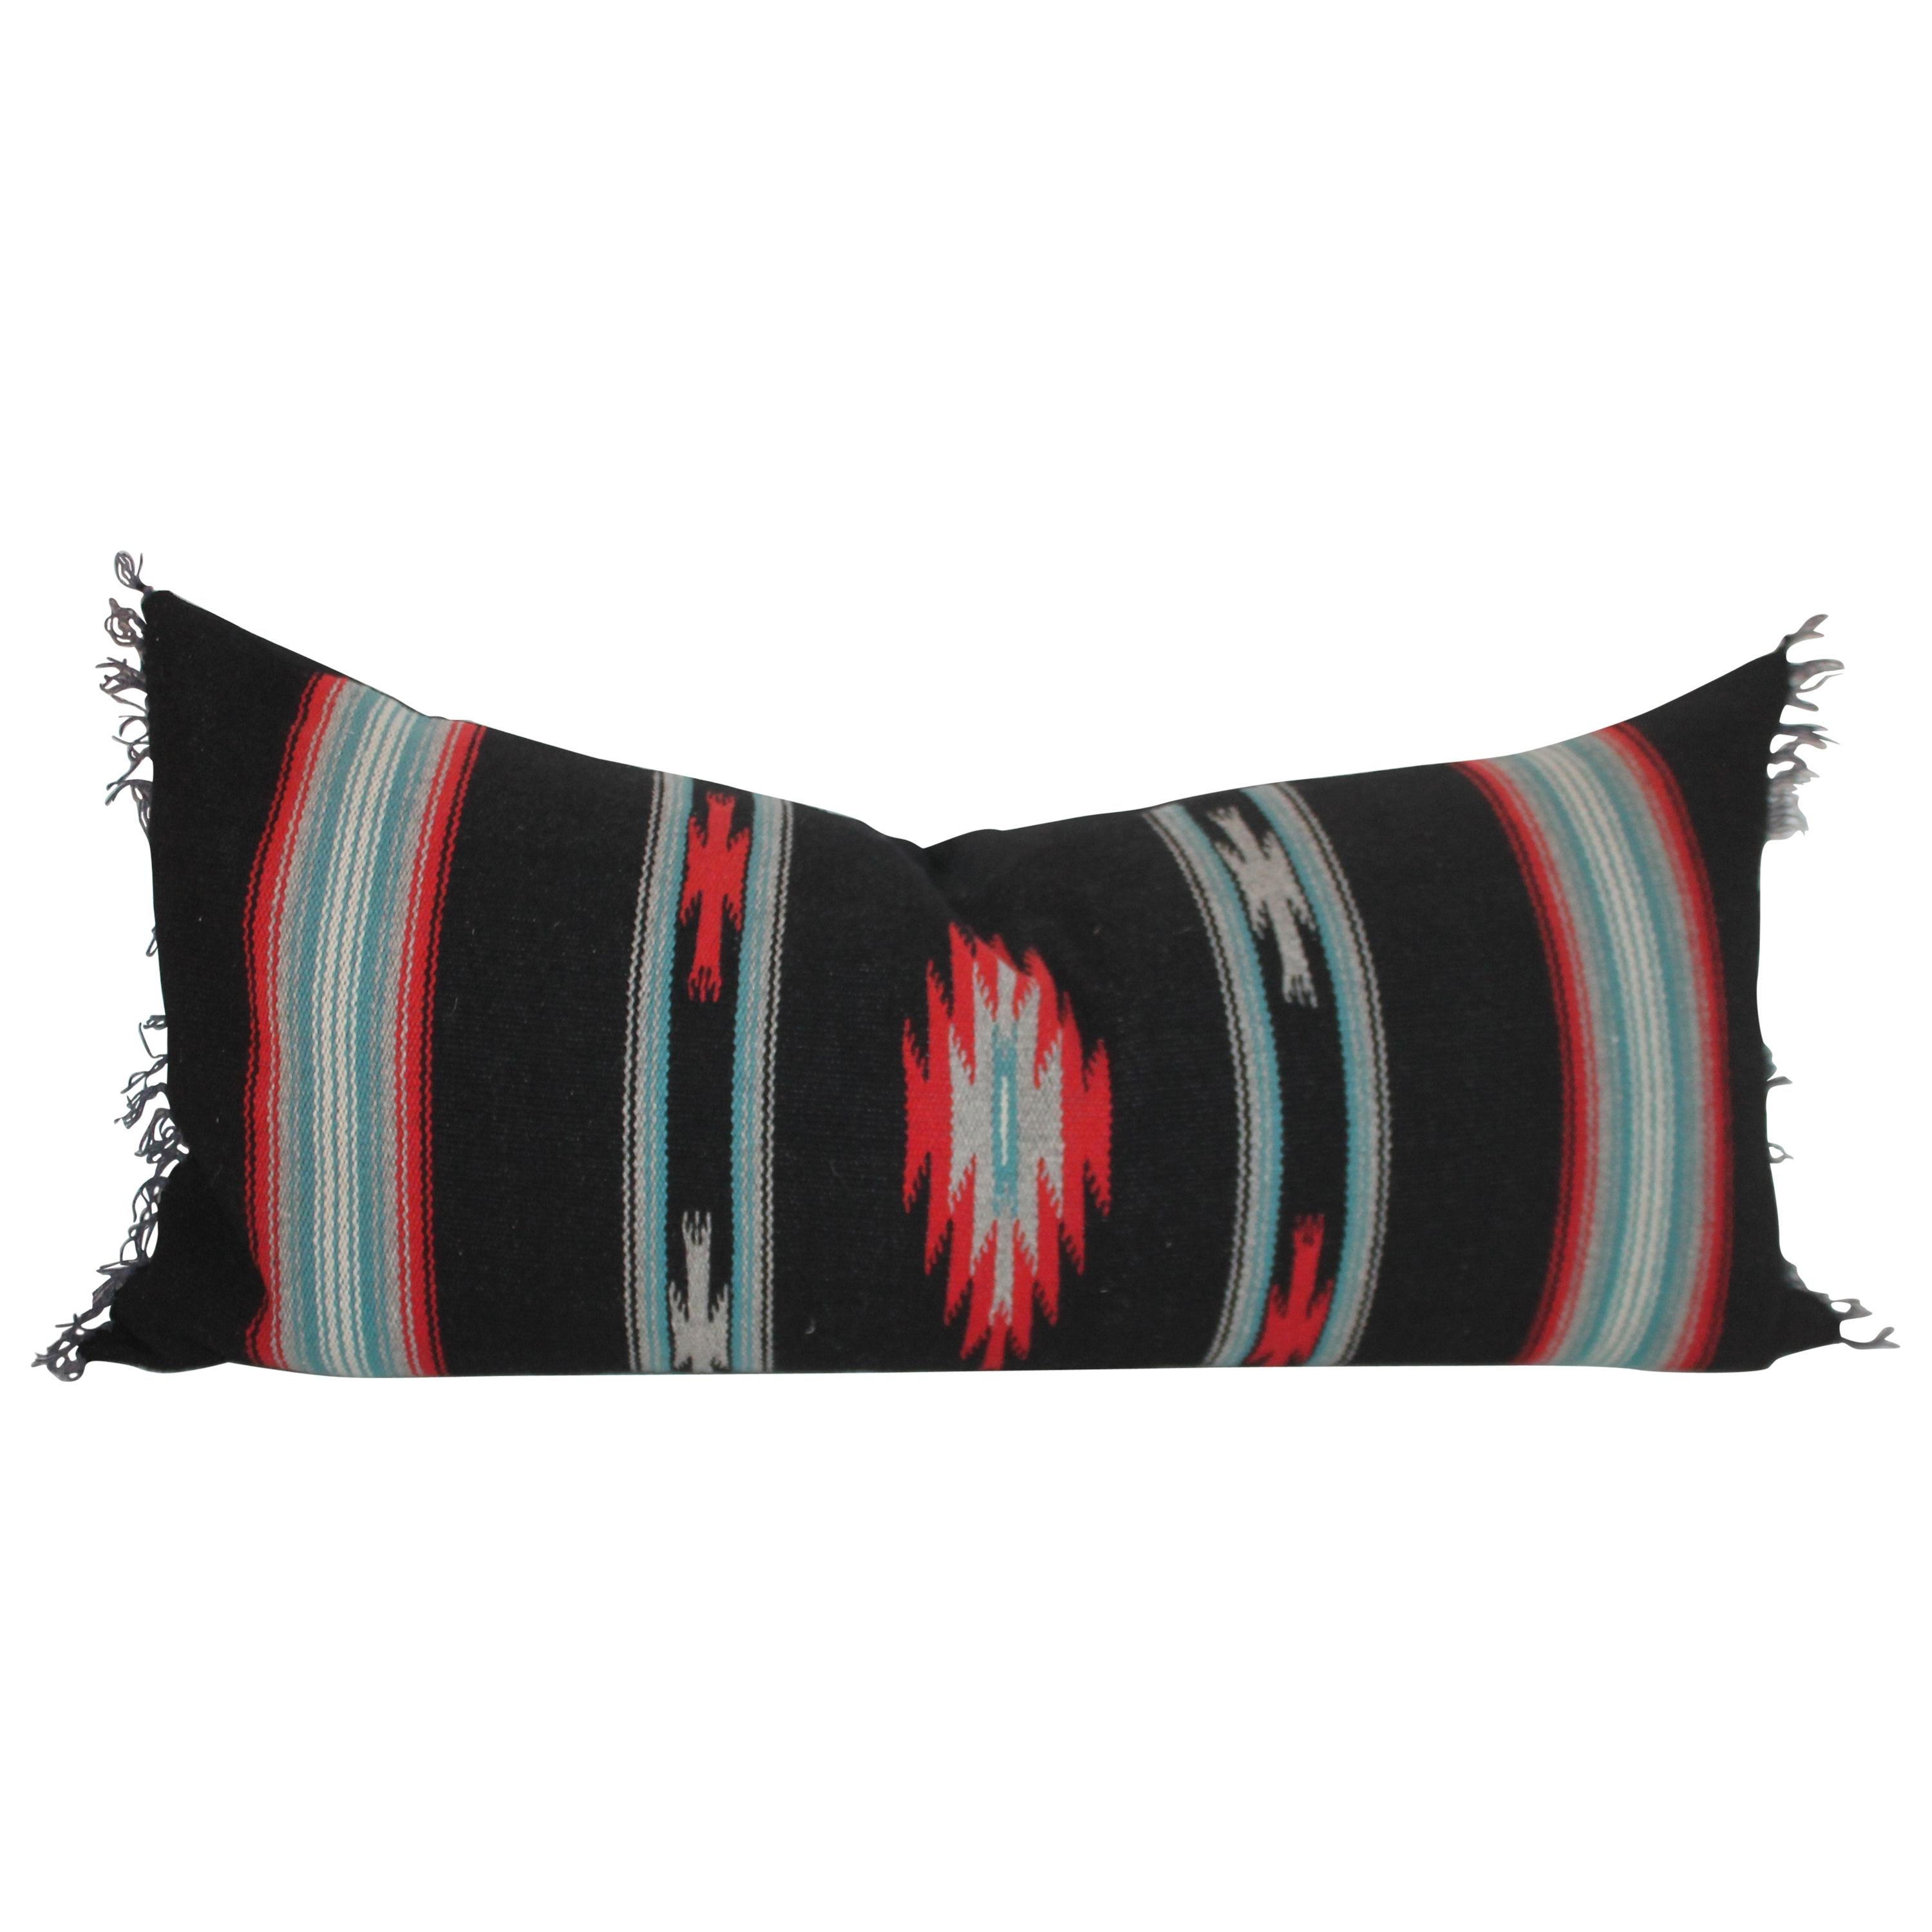 Unusual Black with Striped Turquoise, Red Seeing Eye Dazzler